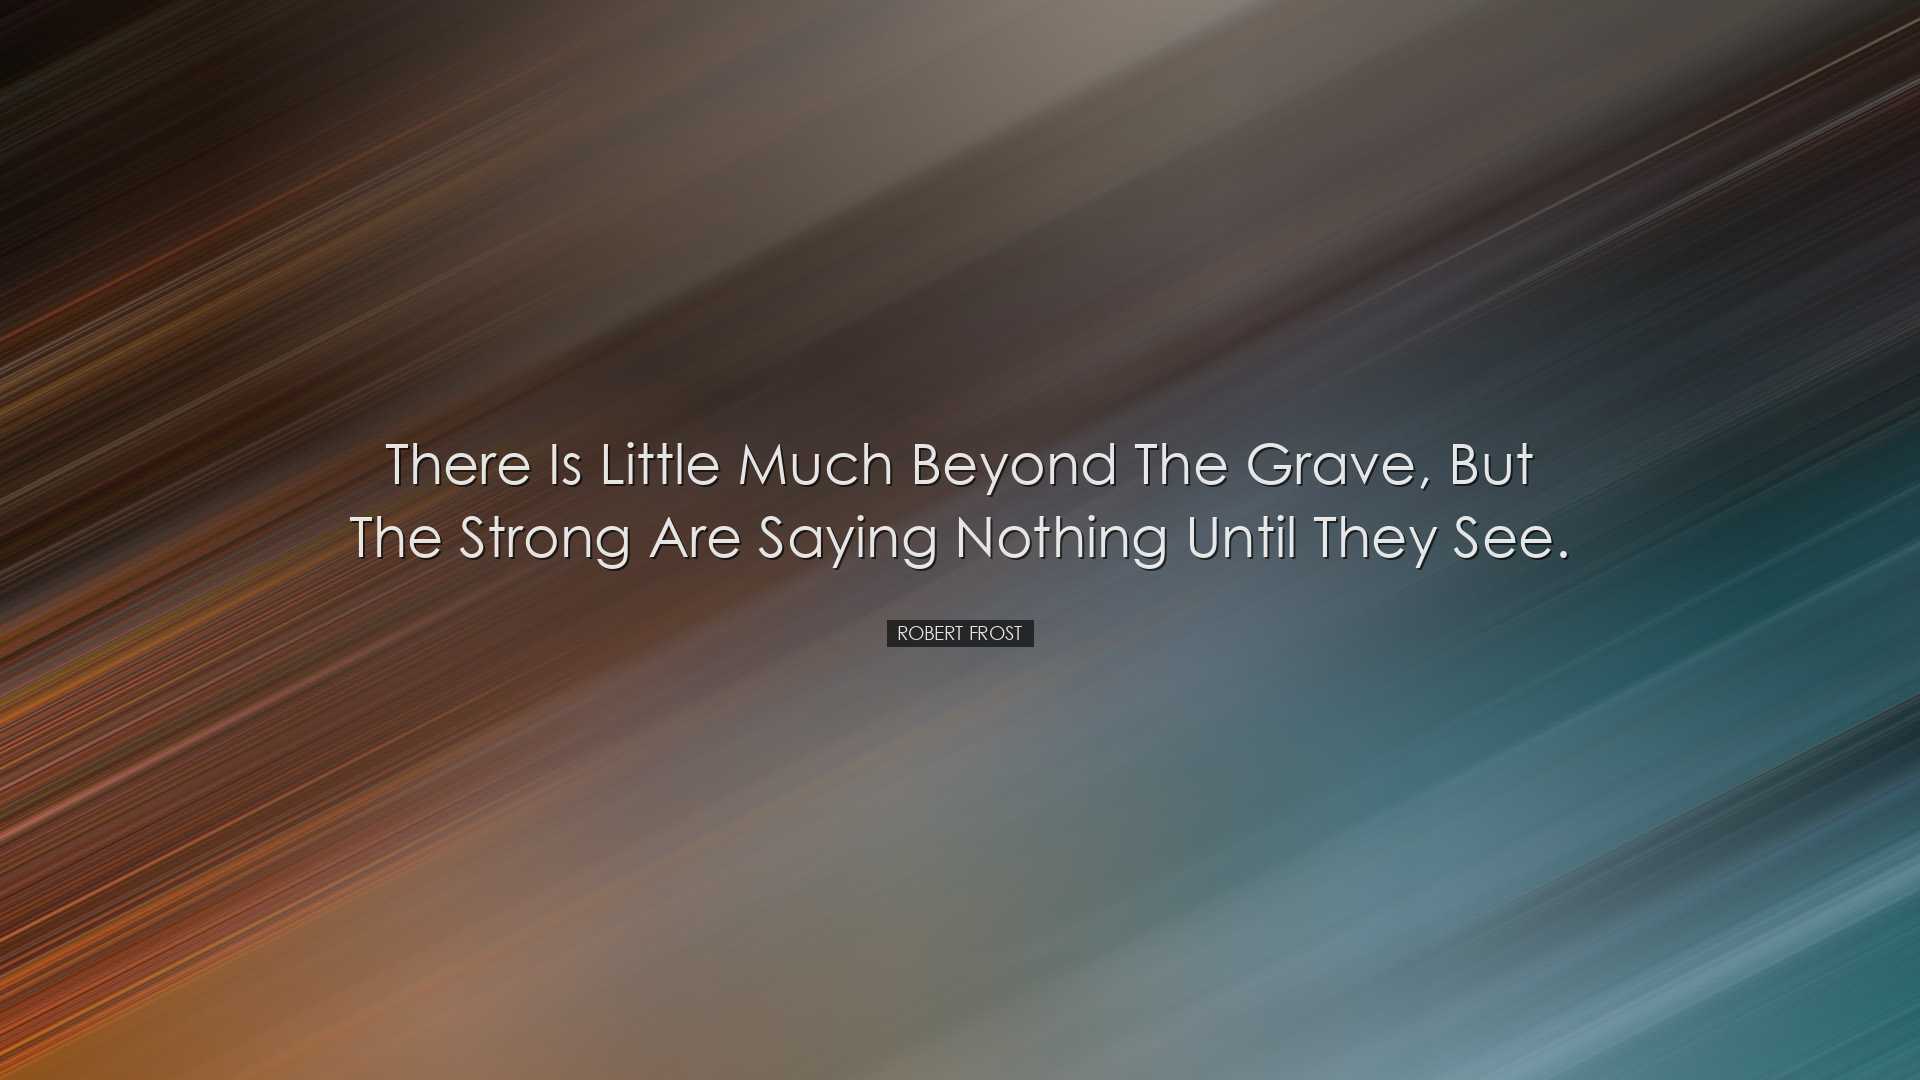 There is little much beyond the grave, but the strong are saying n